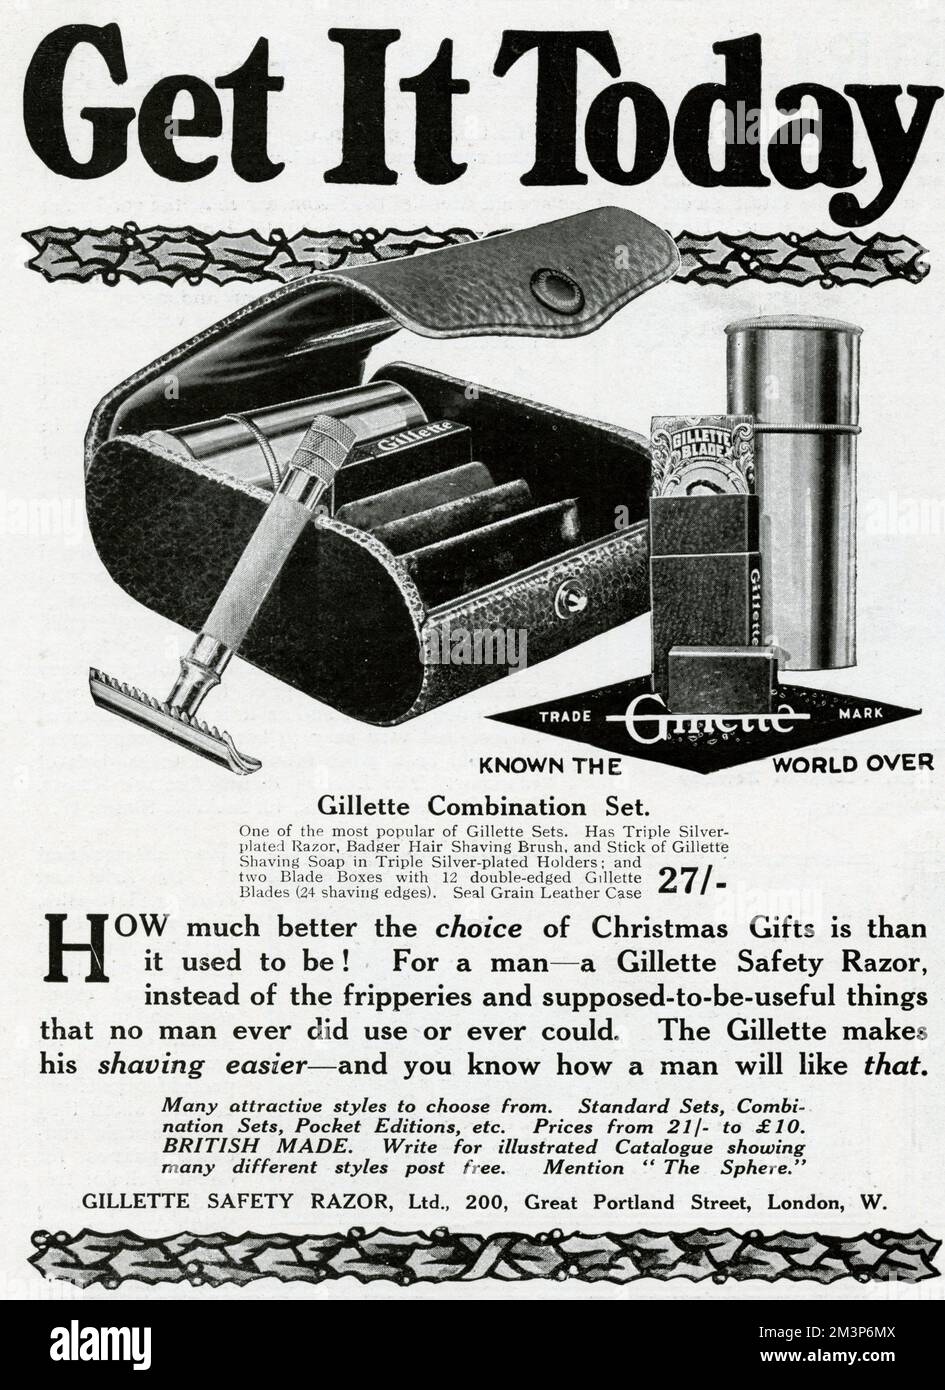 'Get it today'.  How much better the choice of christmas gifts is than it used to be!  For a man - a Gillette safety razor, instead of the fripperies and supposed-to-be-useful things that no man ever did use or ever could.  The Gillette makes his shaving easier - and you know how man will like that.  1915 Stock Photo